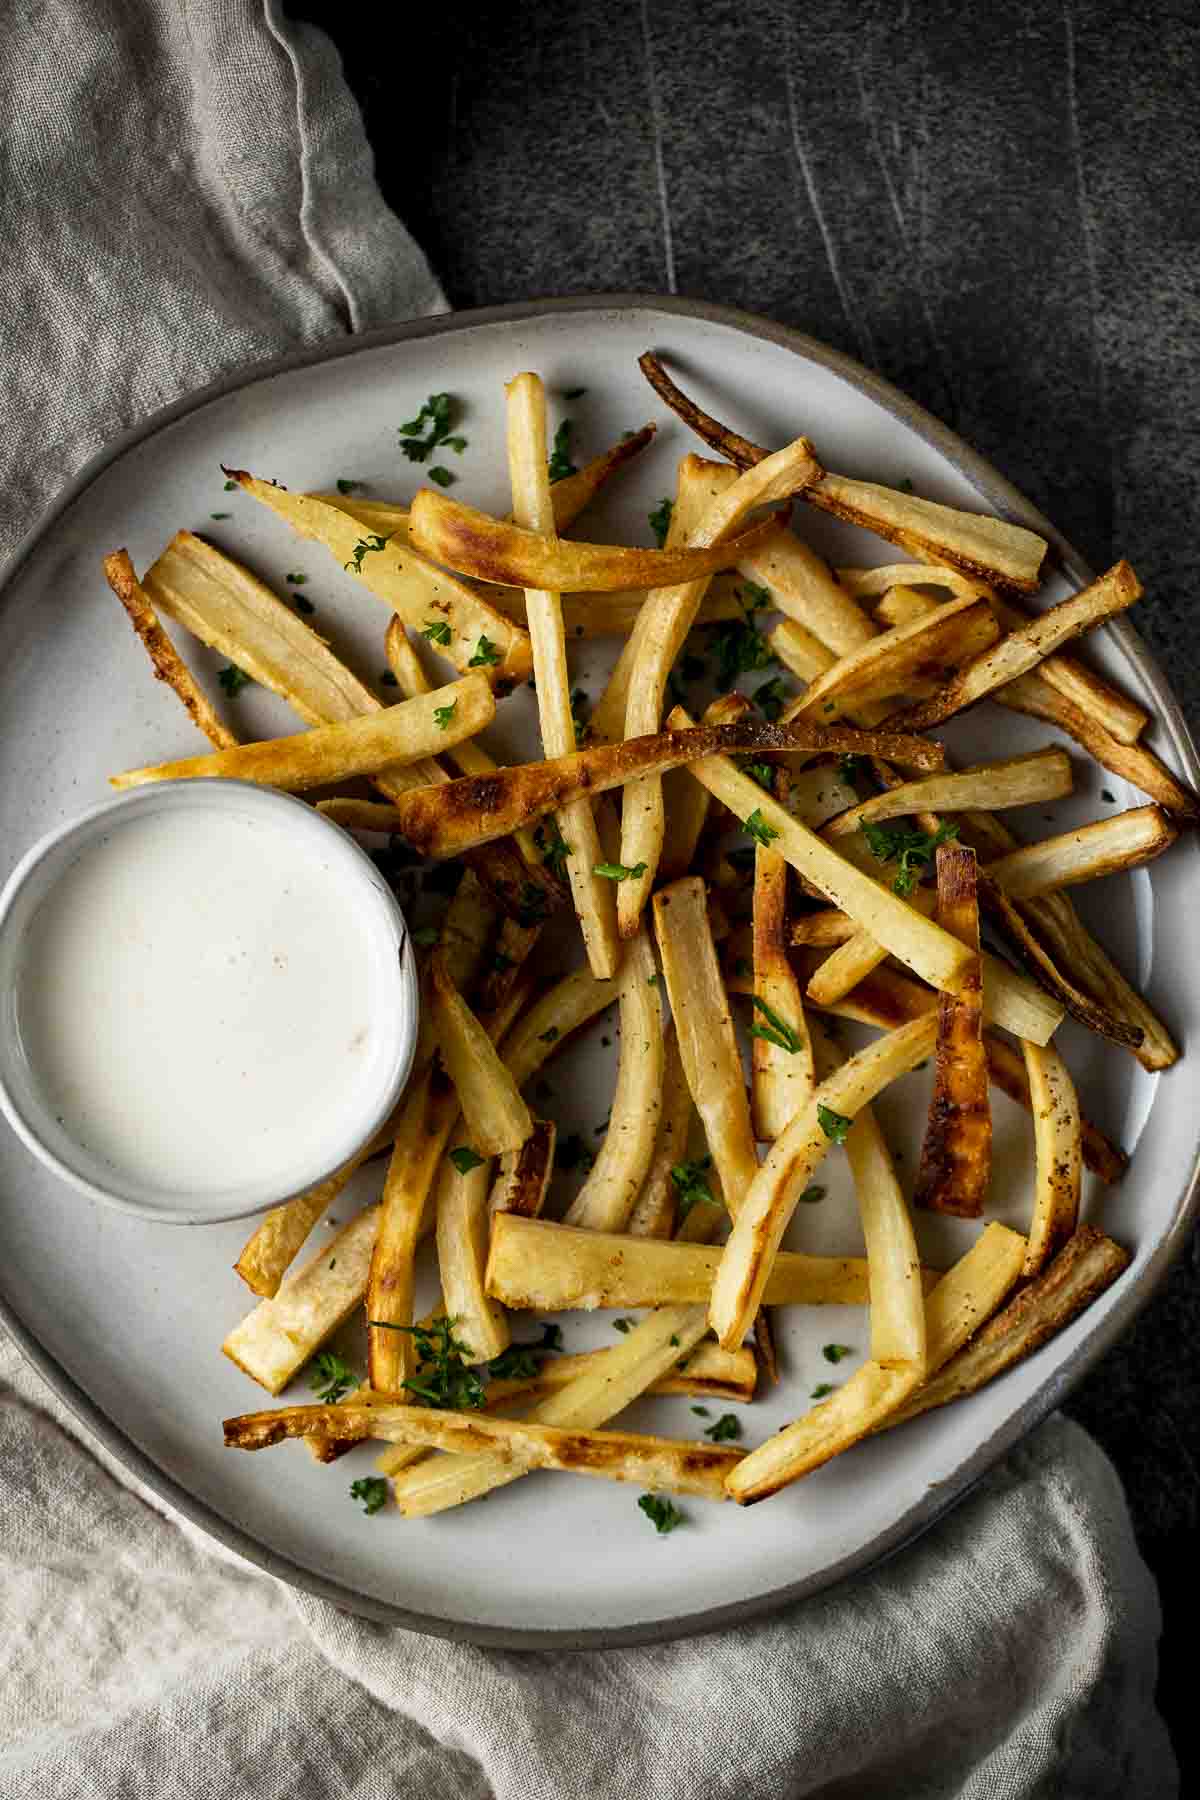 a plate of fries with white dipping sauce on the side